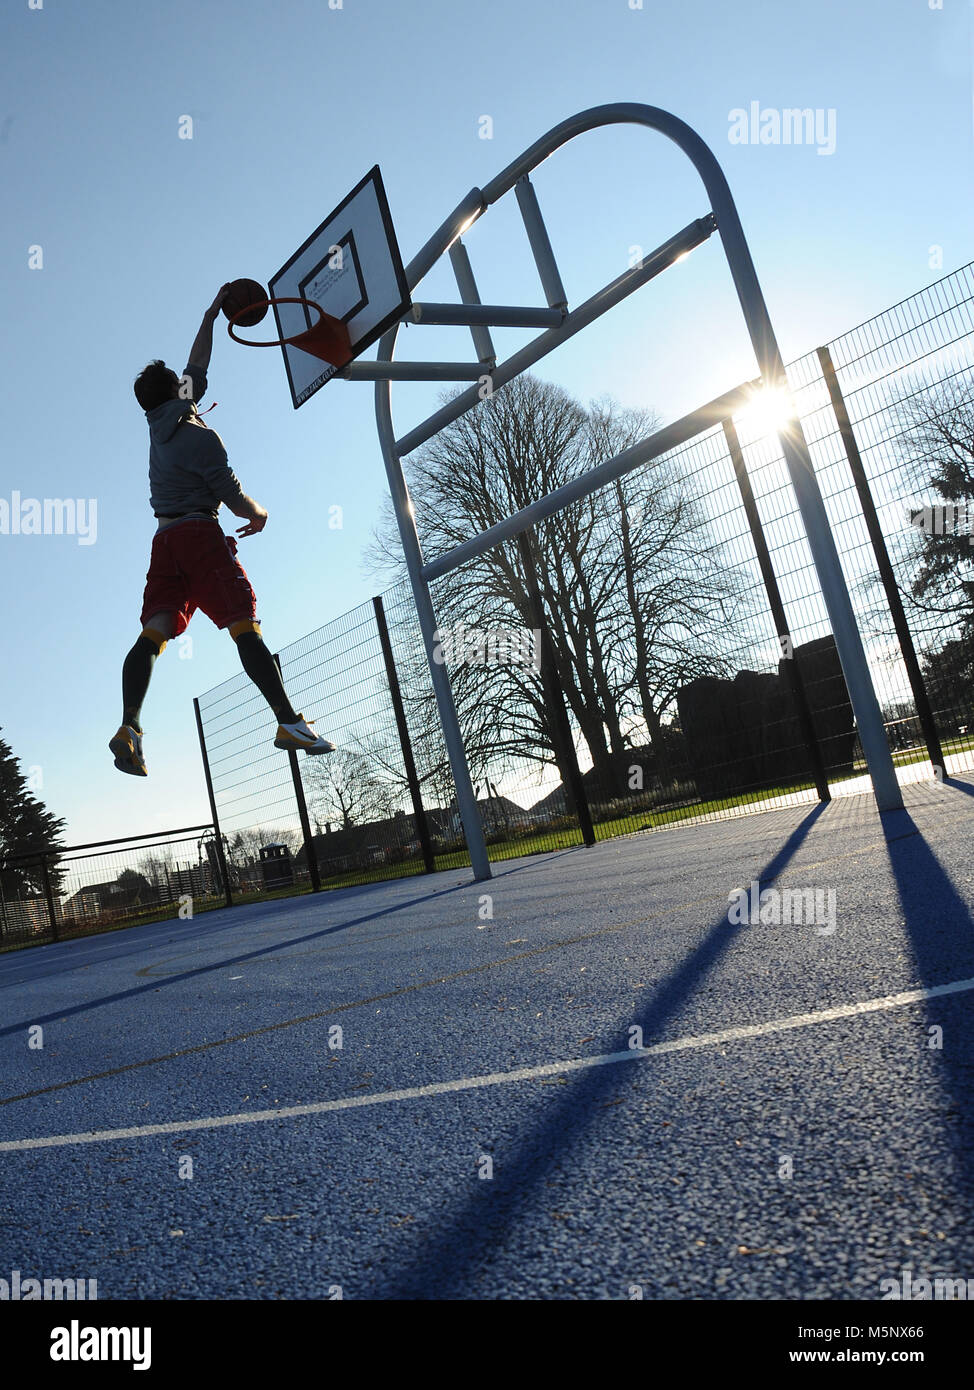 An outdoor shoot of a basketball player in Devizes, Wiltshire. Shot in natural sunlight on a basketball court. Wide depth of filed, good lighting. Stock Photo